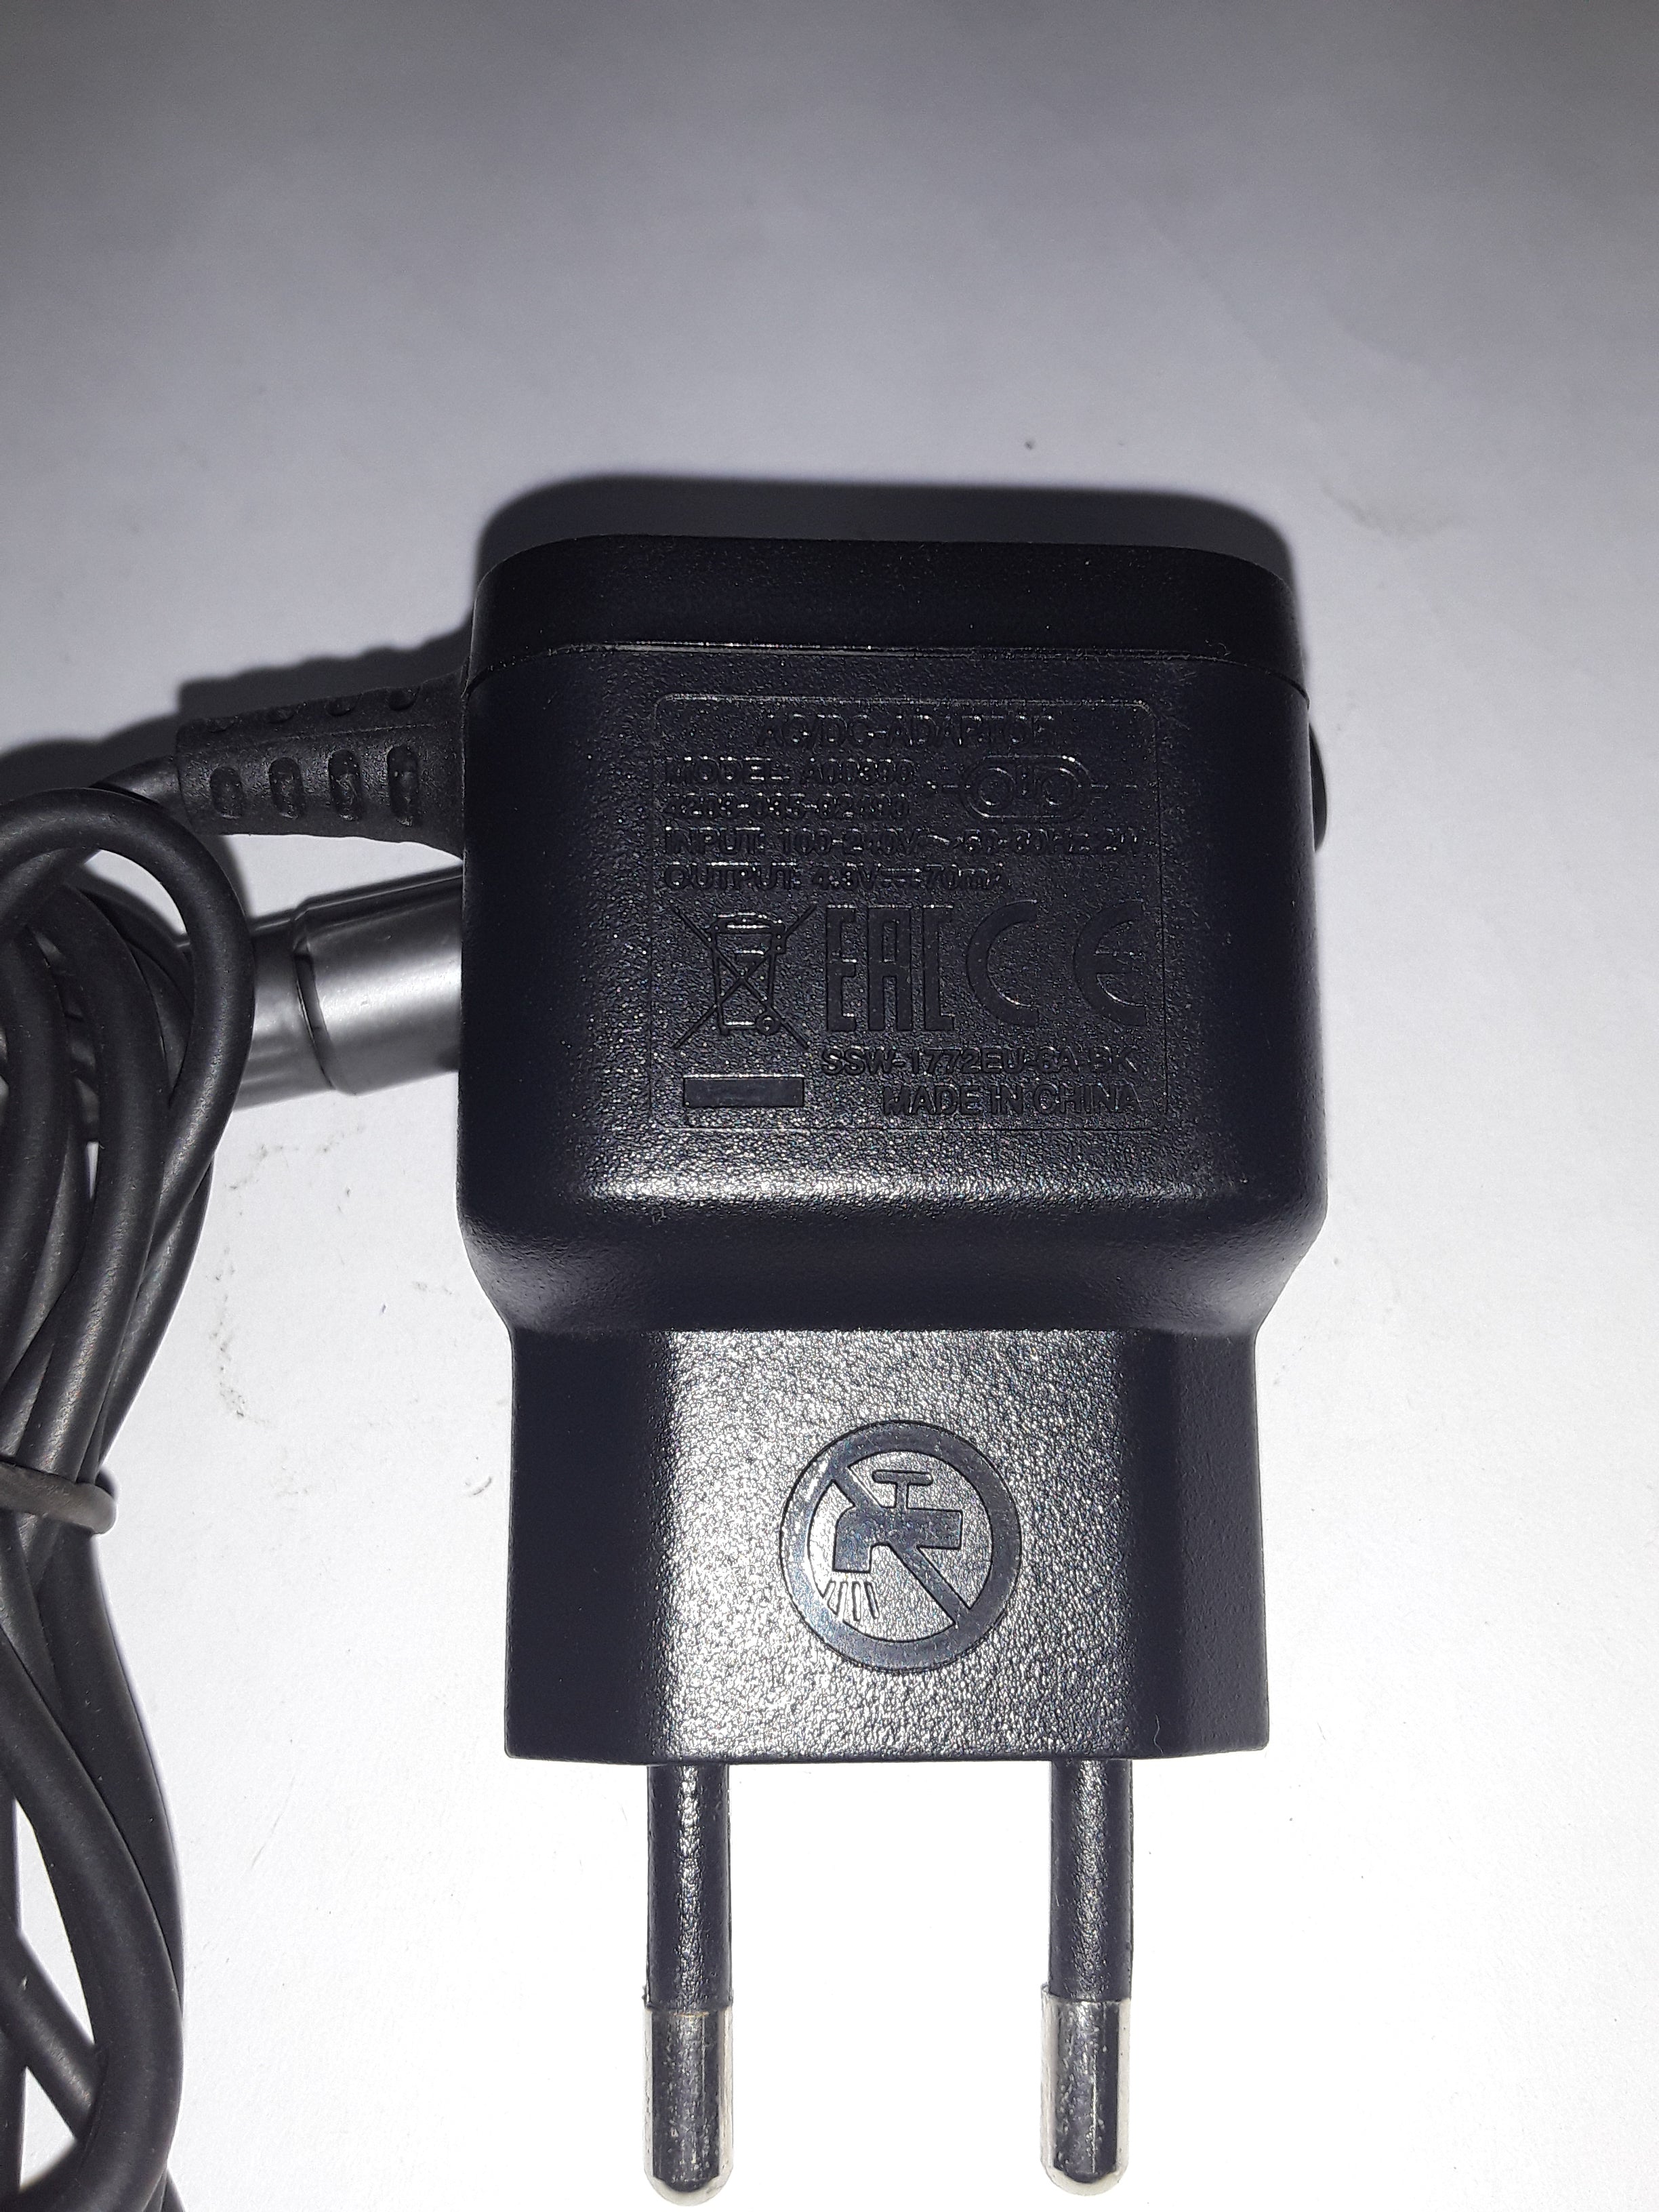 Philips Ac/Dc-Adaptor 230V Dc4.3V Charger-Quality Pre Owned